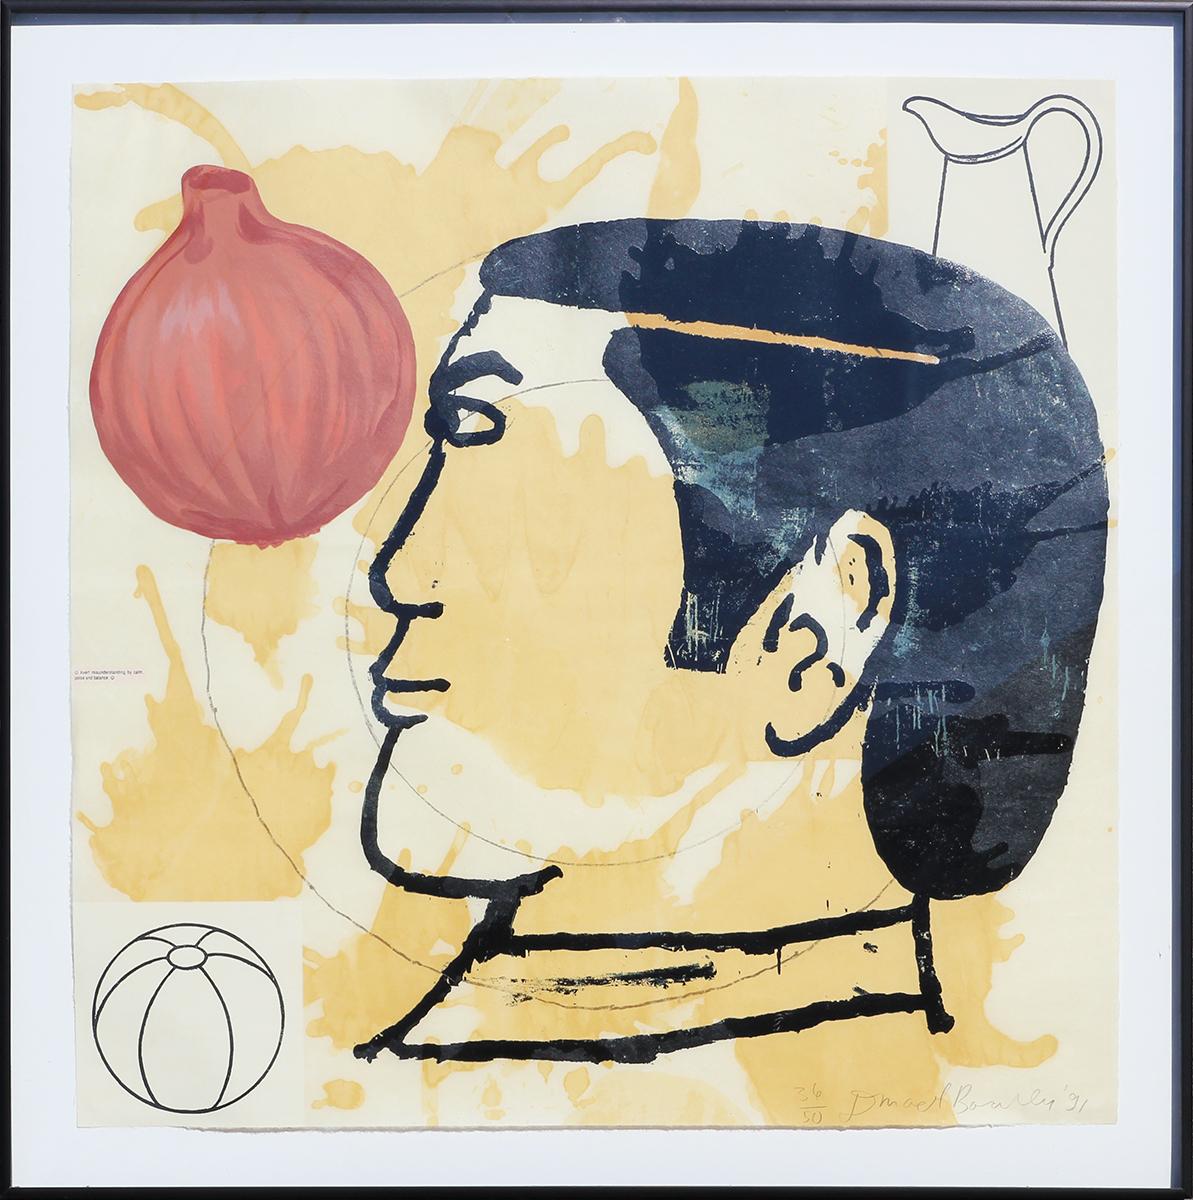 Donald Baechler Figurative Print - “Onion Eater II” Neutral Toned Surreal Contemporary Abstract Silkscreen 